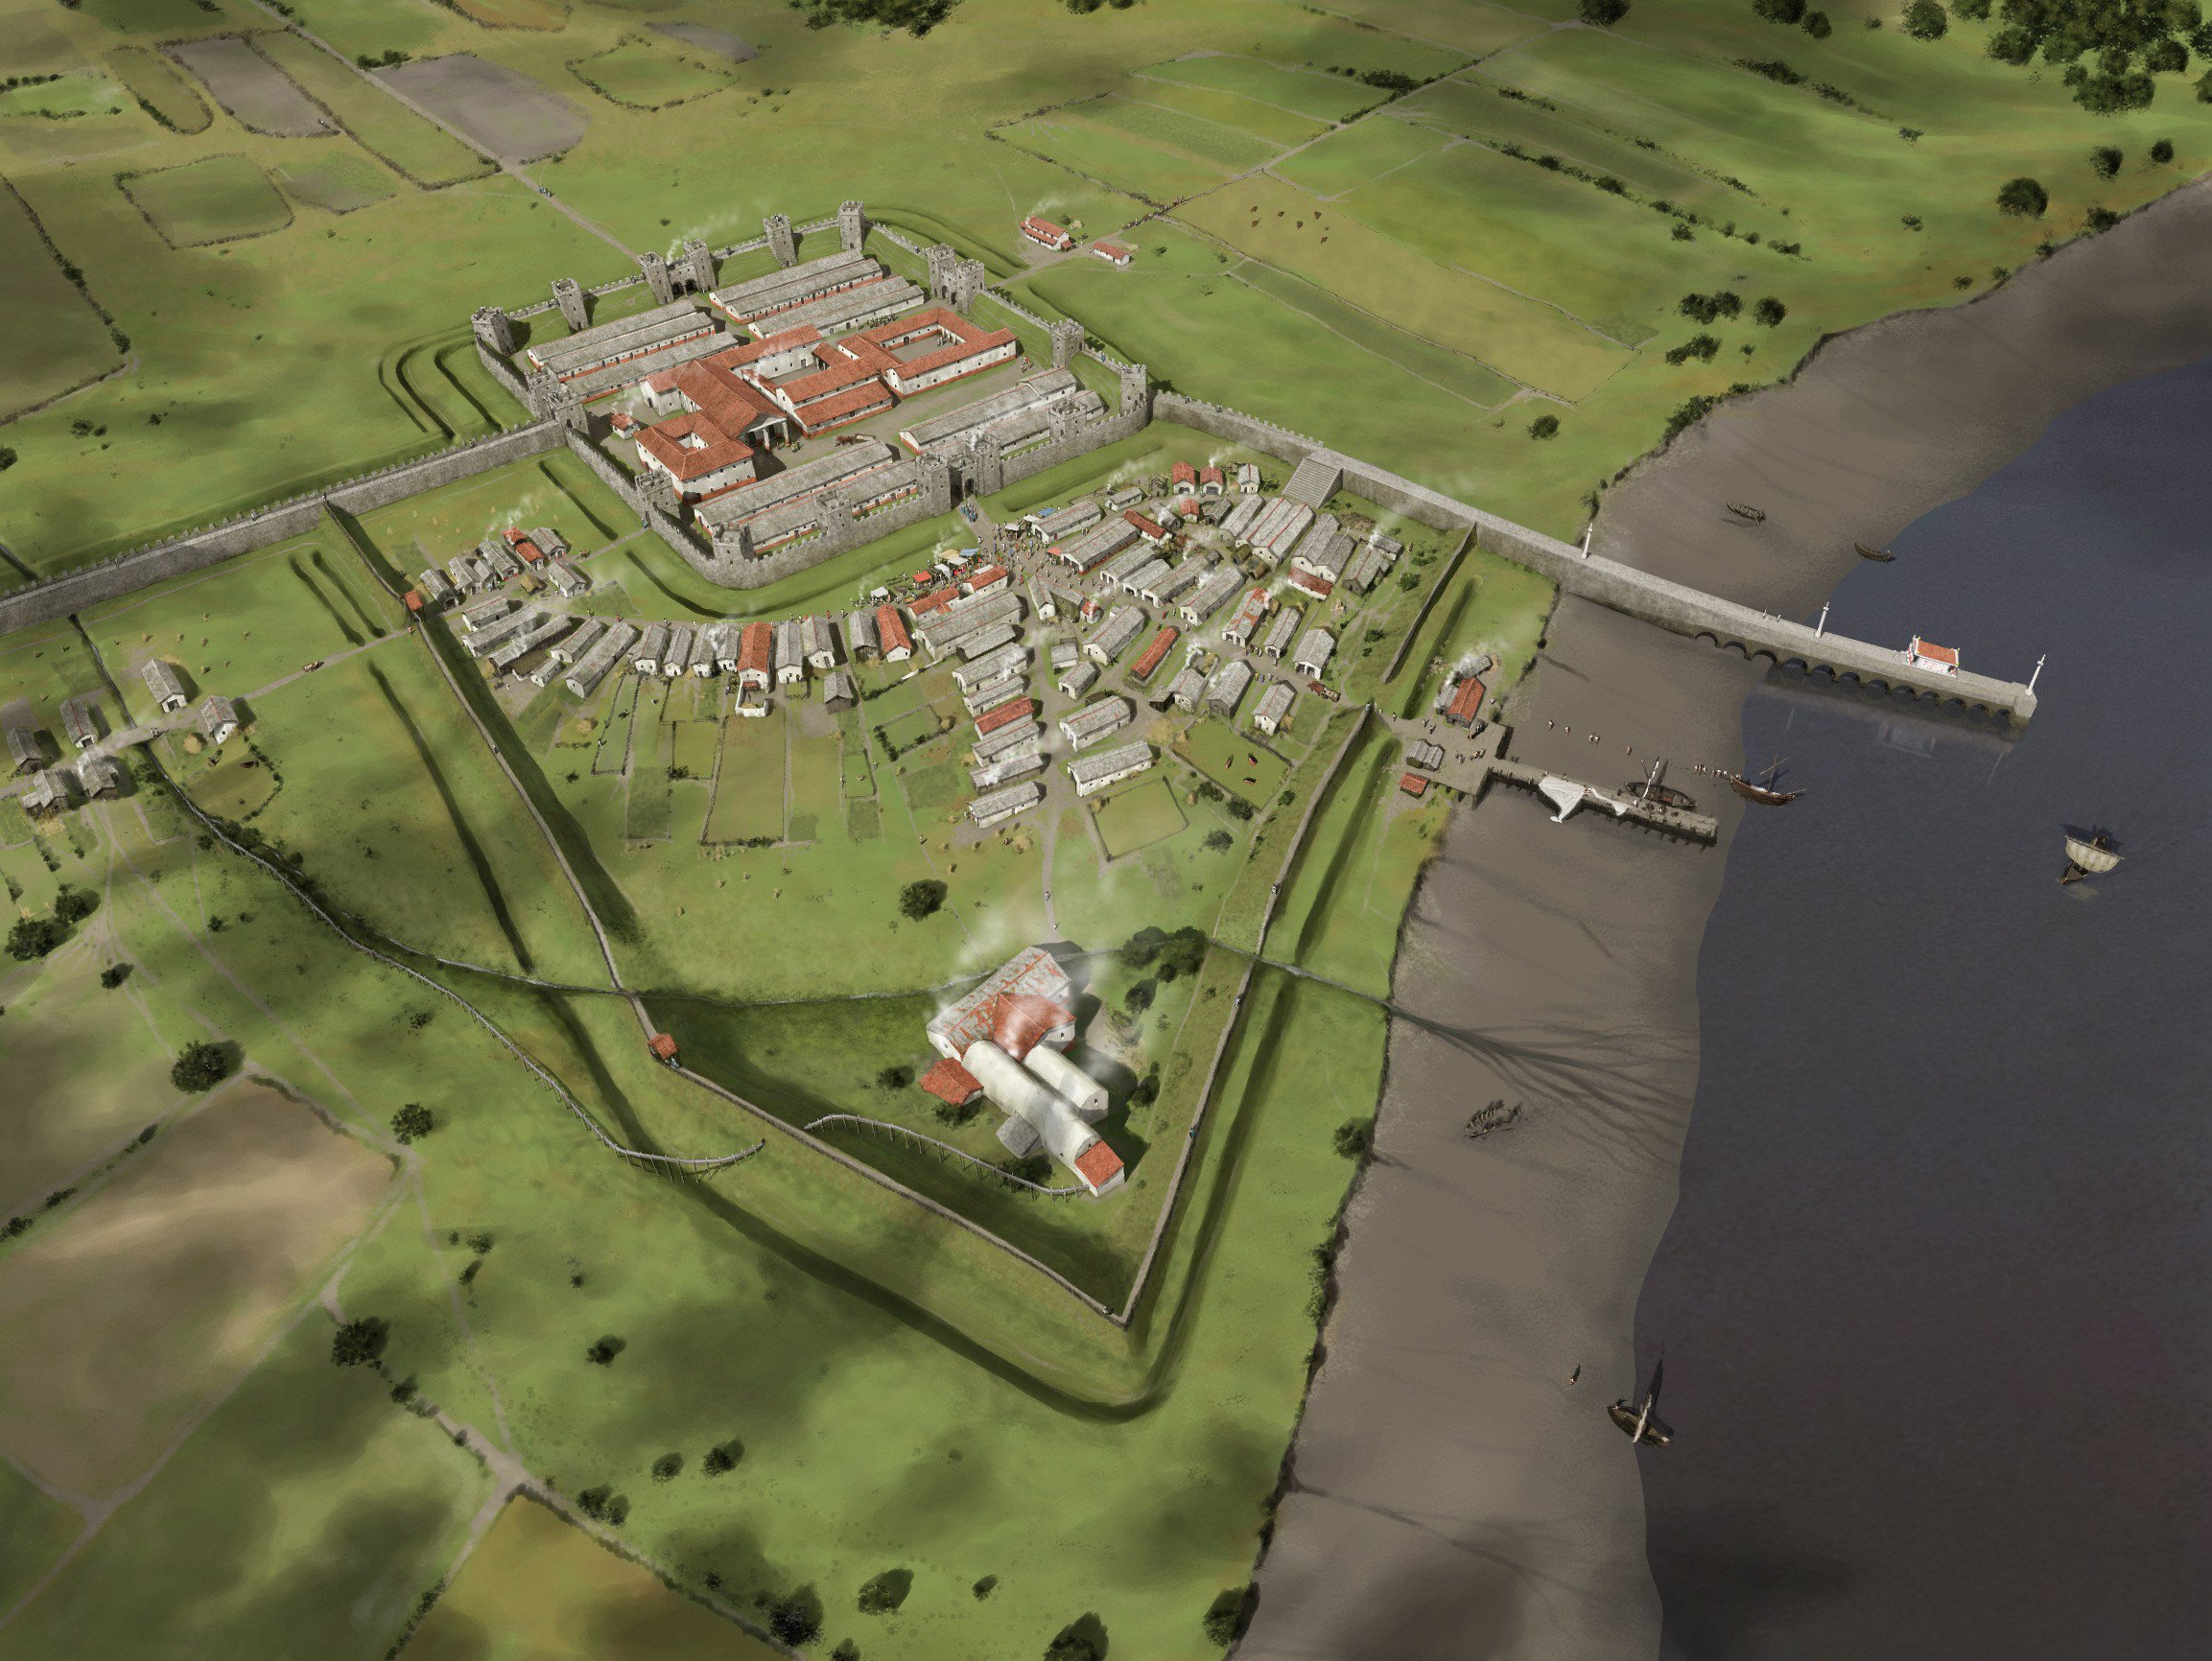 Aerial view of how the Roman fort may have looked